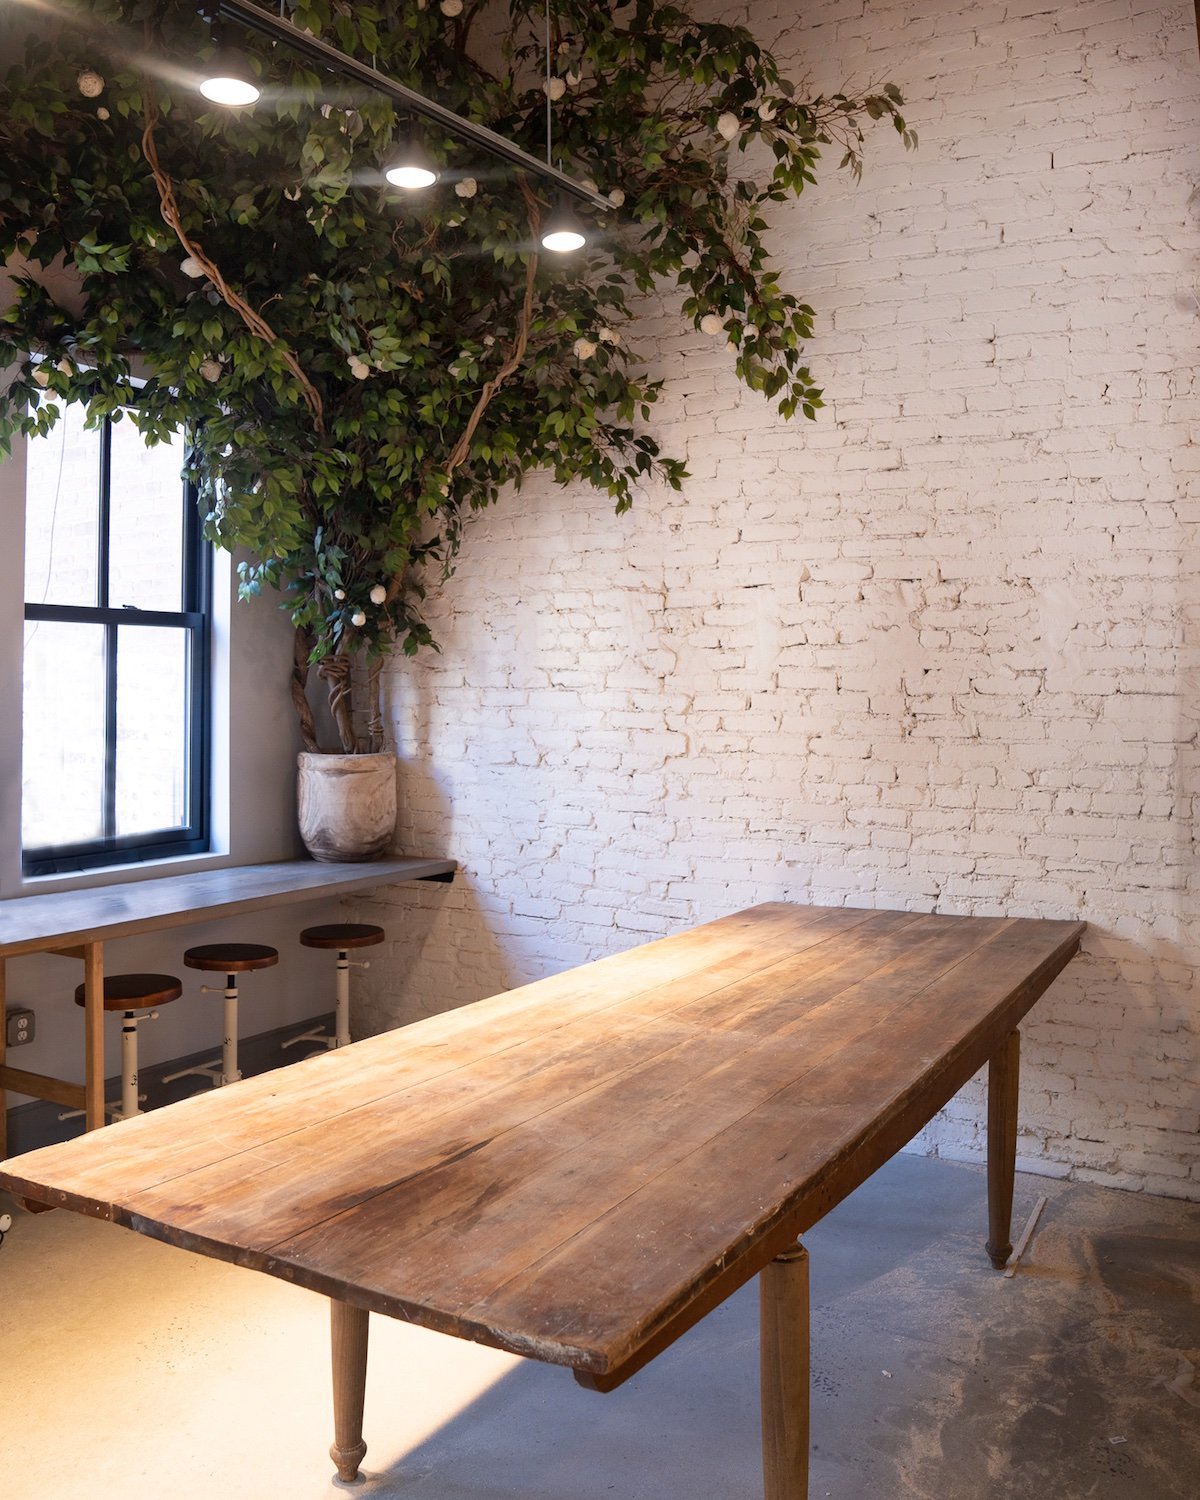 "The Study" at Maman Georgetown will have a communal table for group huddles. Photograph by Isabelle N. Photography